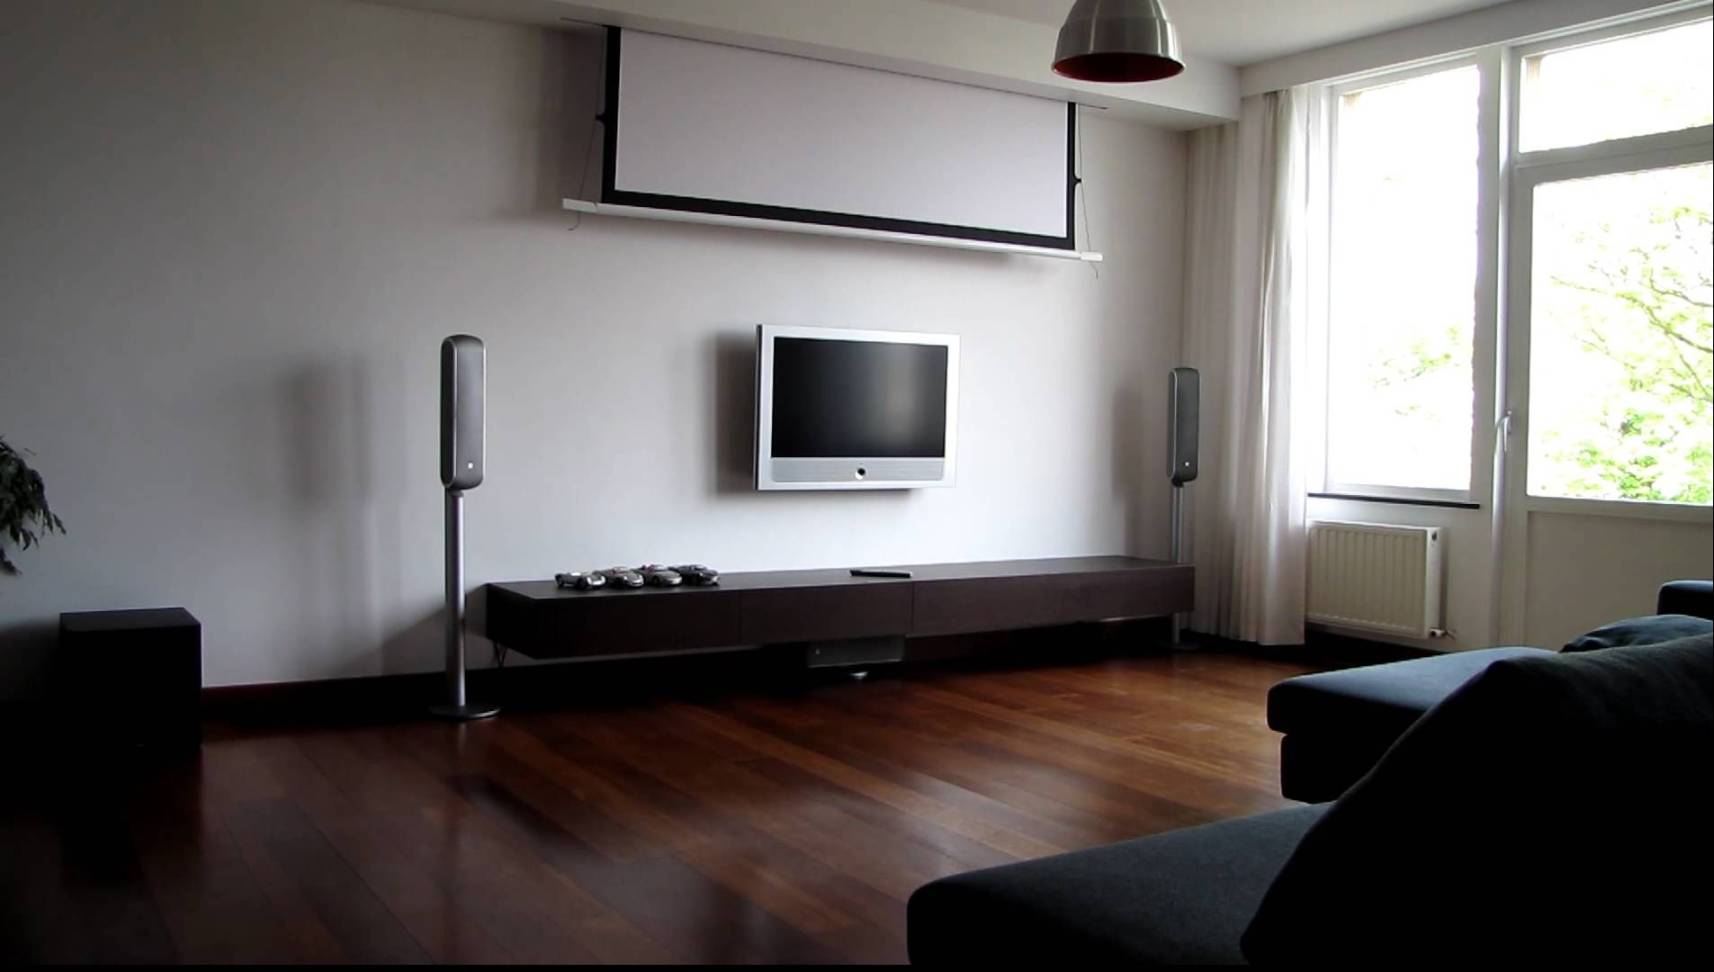 living room projector ideas - Google Search  Projector screen living room,  Projector screen, Home theater seating